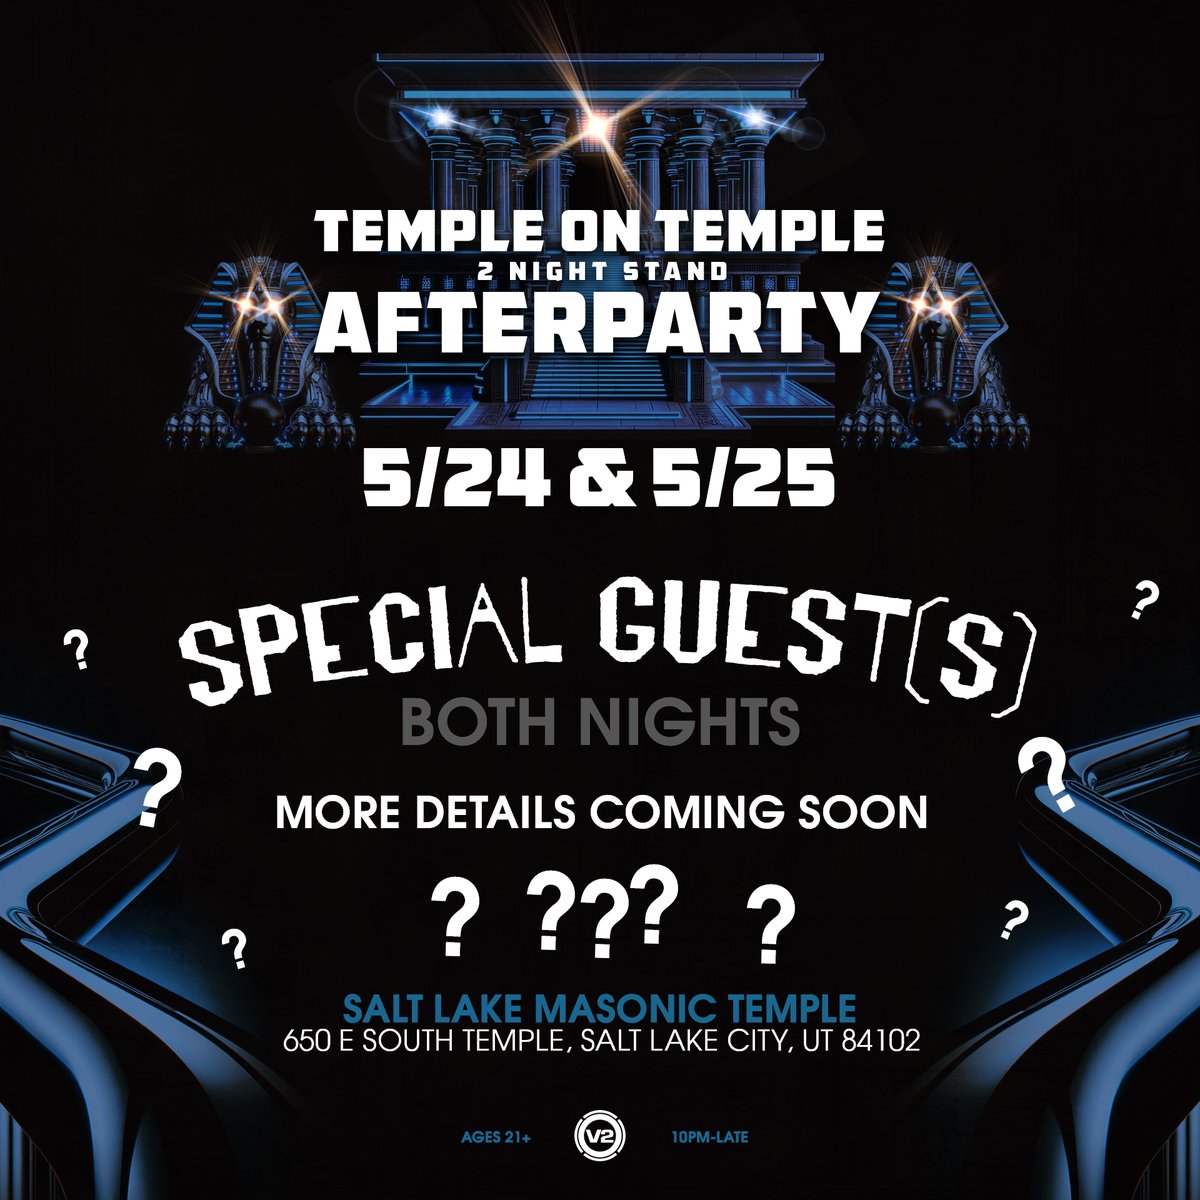 After the show the crew is packing up and heading over to the Temple on Temple for the official '2 Night Stand' afterparty! Friday + Saturday Tickets → bit.ly/3KhDXBz